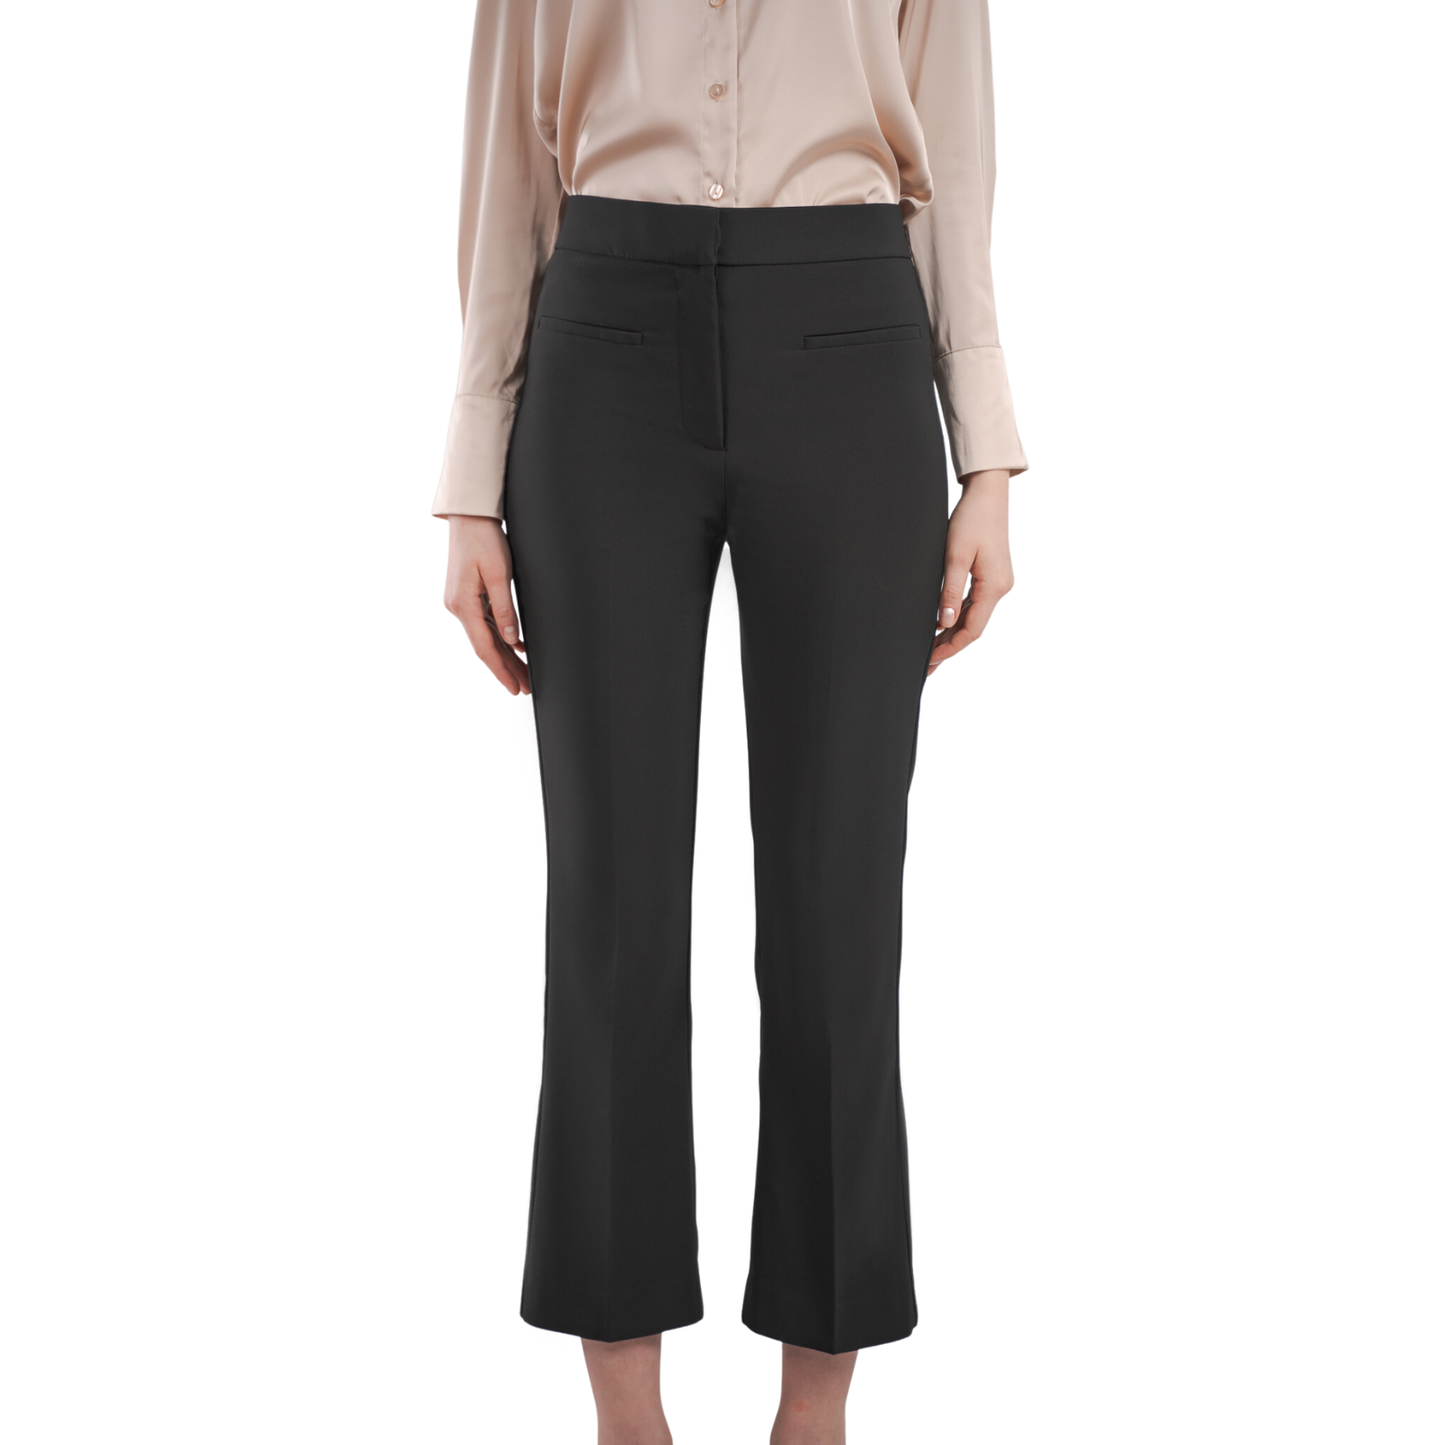 Summer Woven Work Pants High Waisted Casual, Ankled Straight Leg Pants for Business Work Office